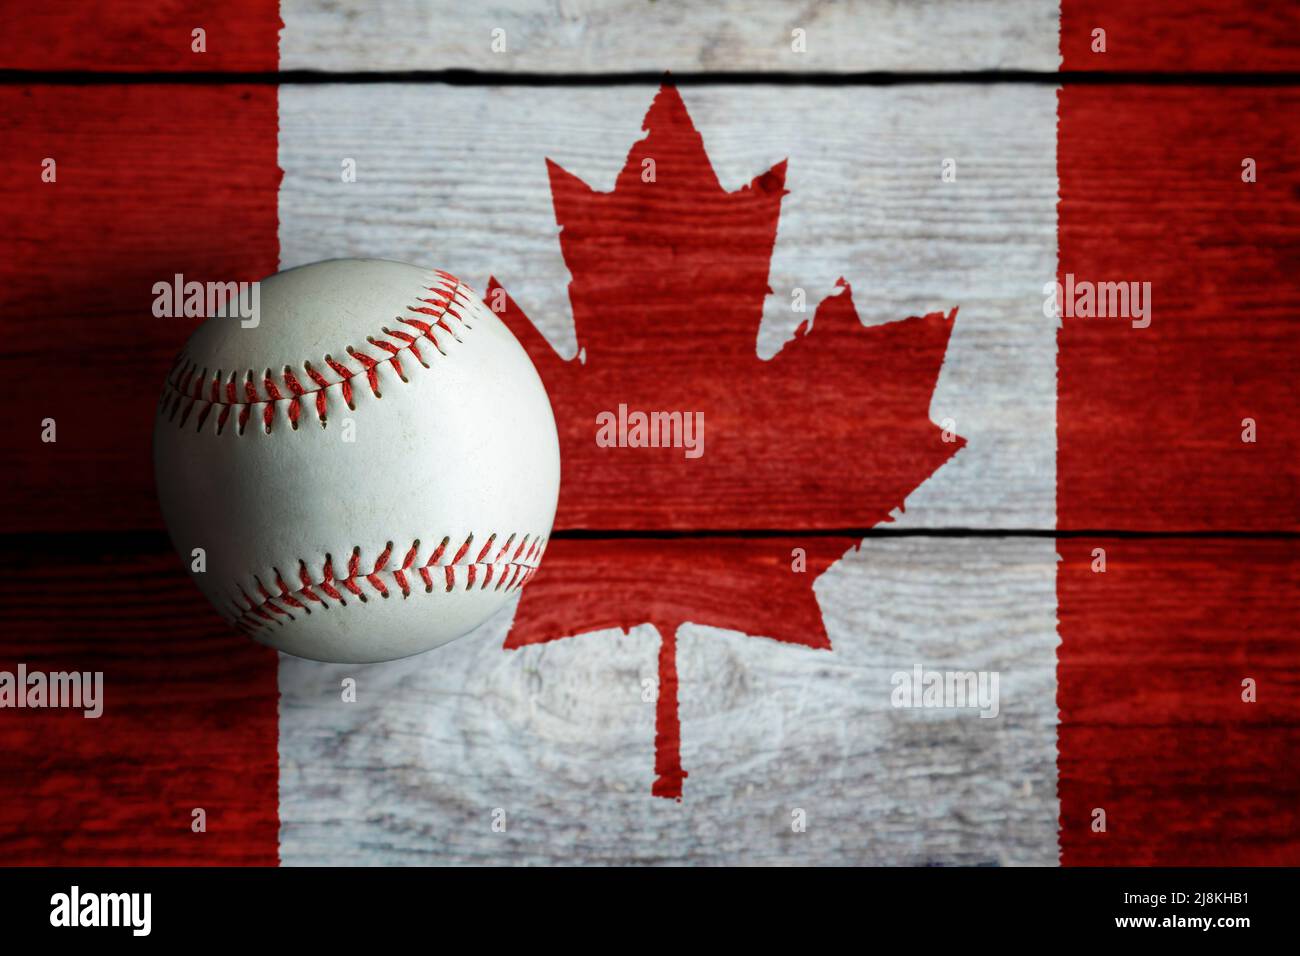 Leather baseball on rustic wooden background painted with Canadian flag with copy space. Canada is one of the top baseball nations in the world. Stock Photo